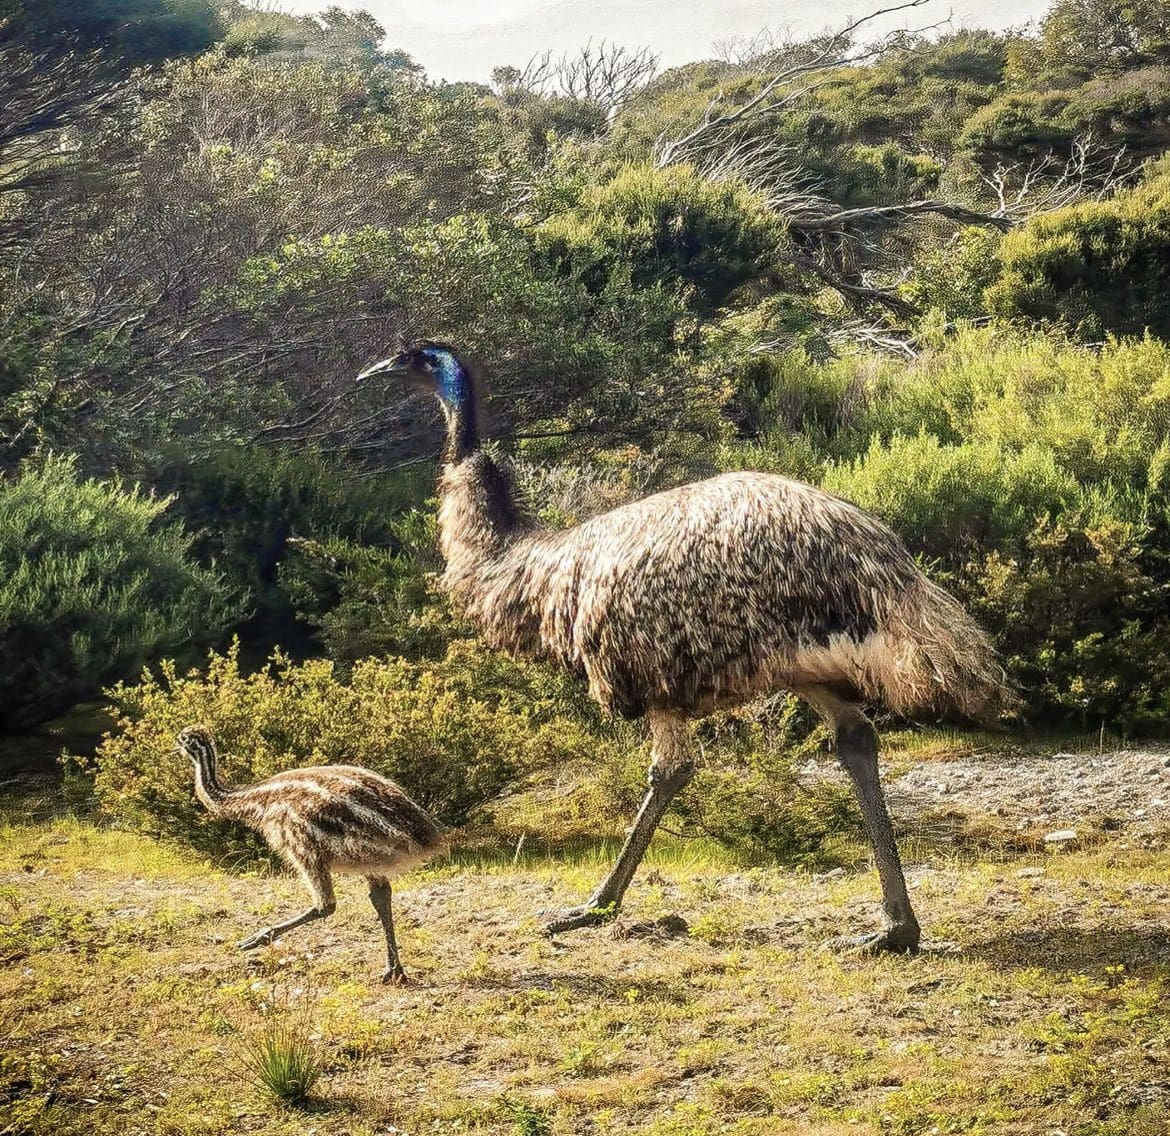 Emu mother and chick